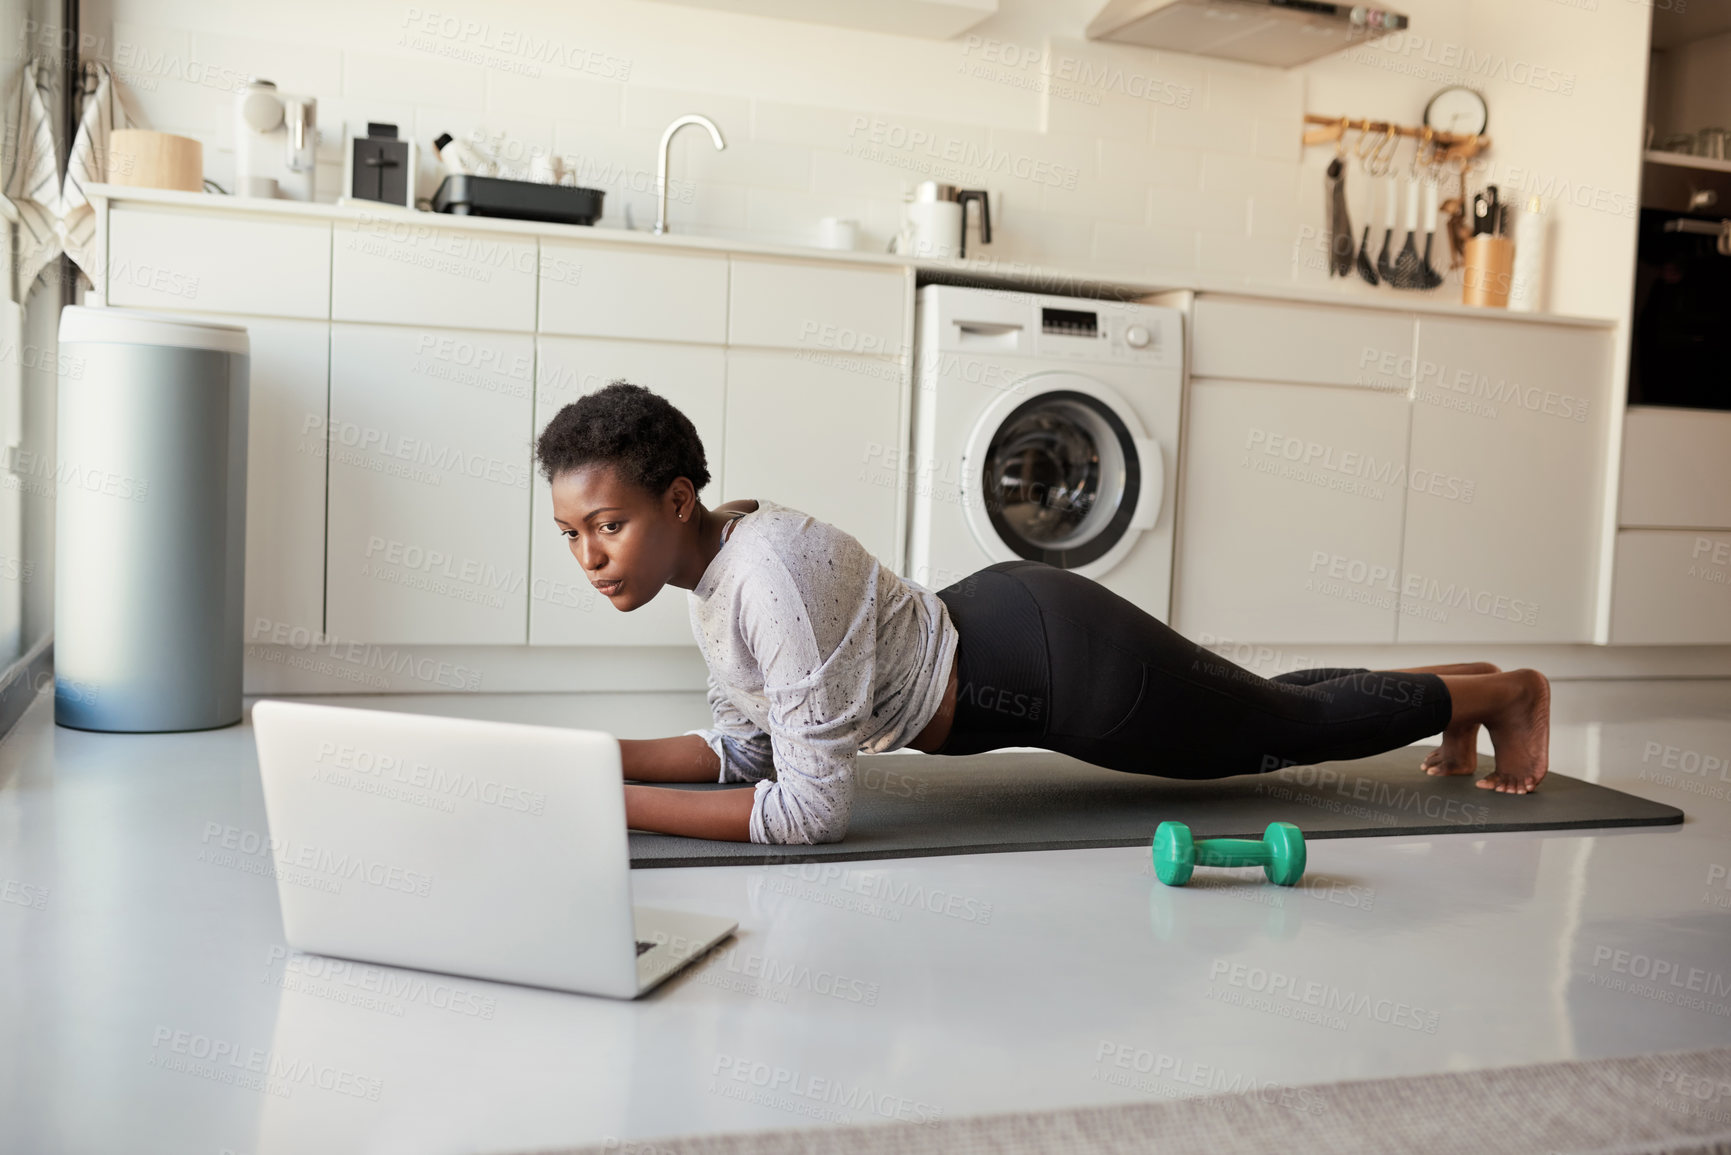 Buy stock photo Shot of a young woman using a laptop while exercising at home